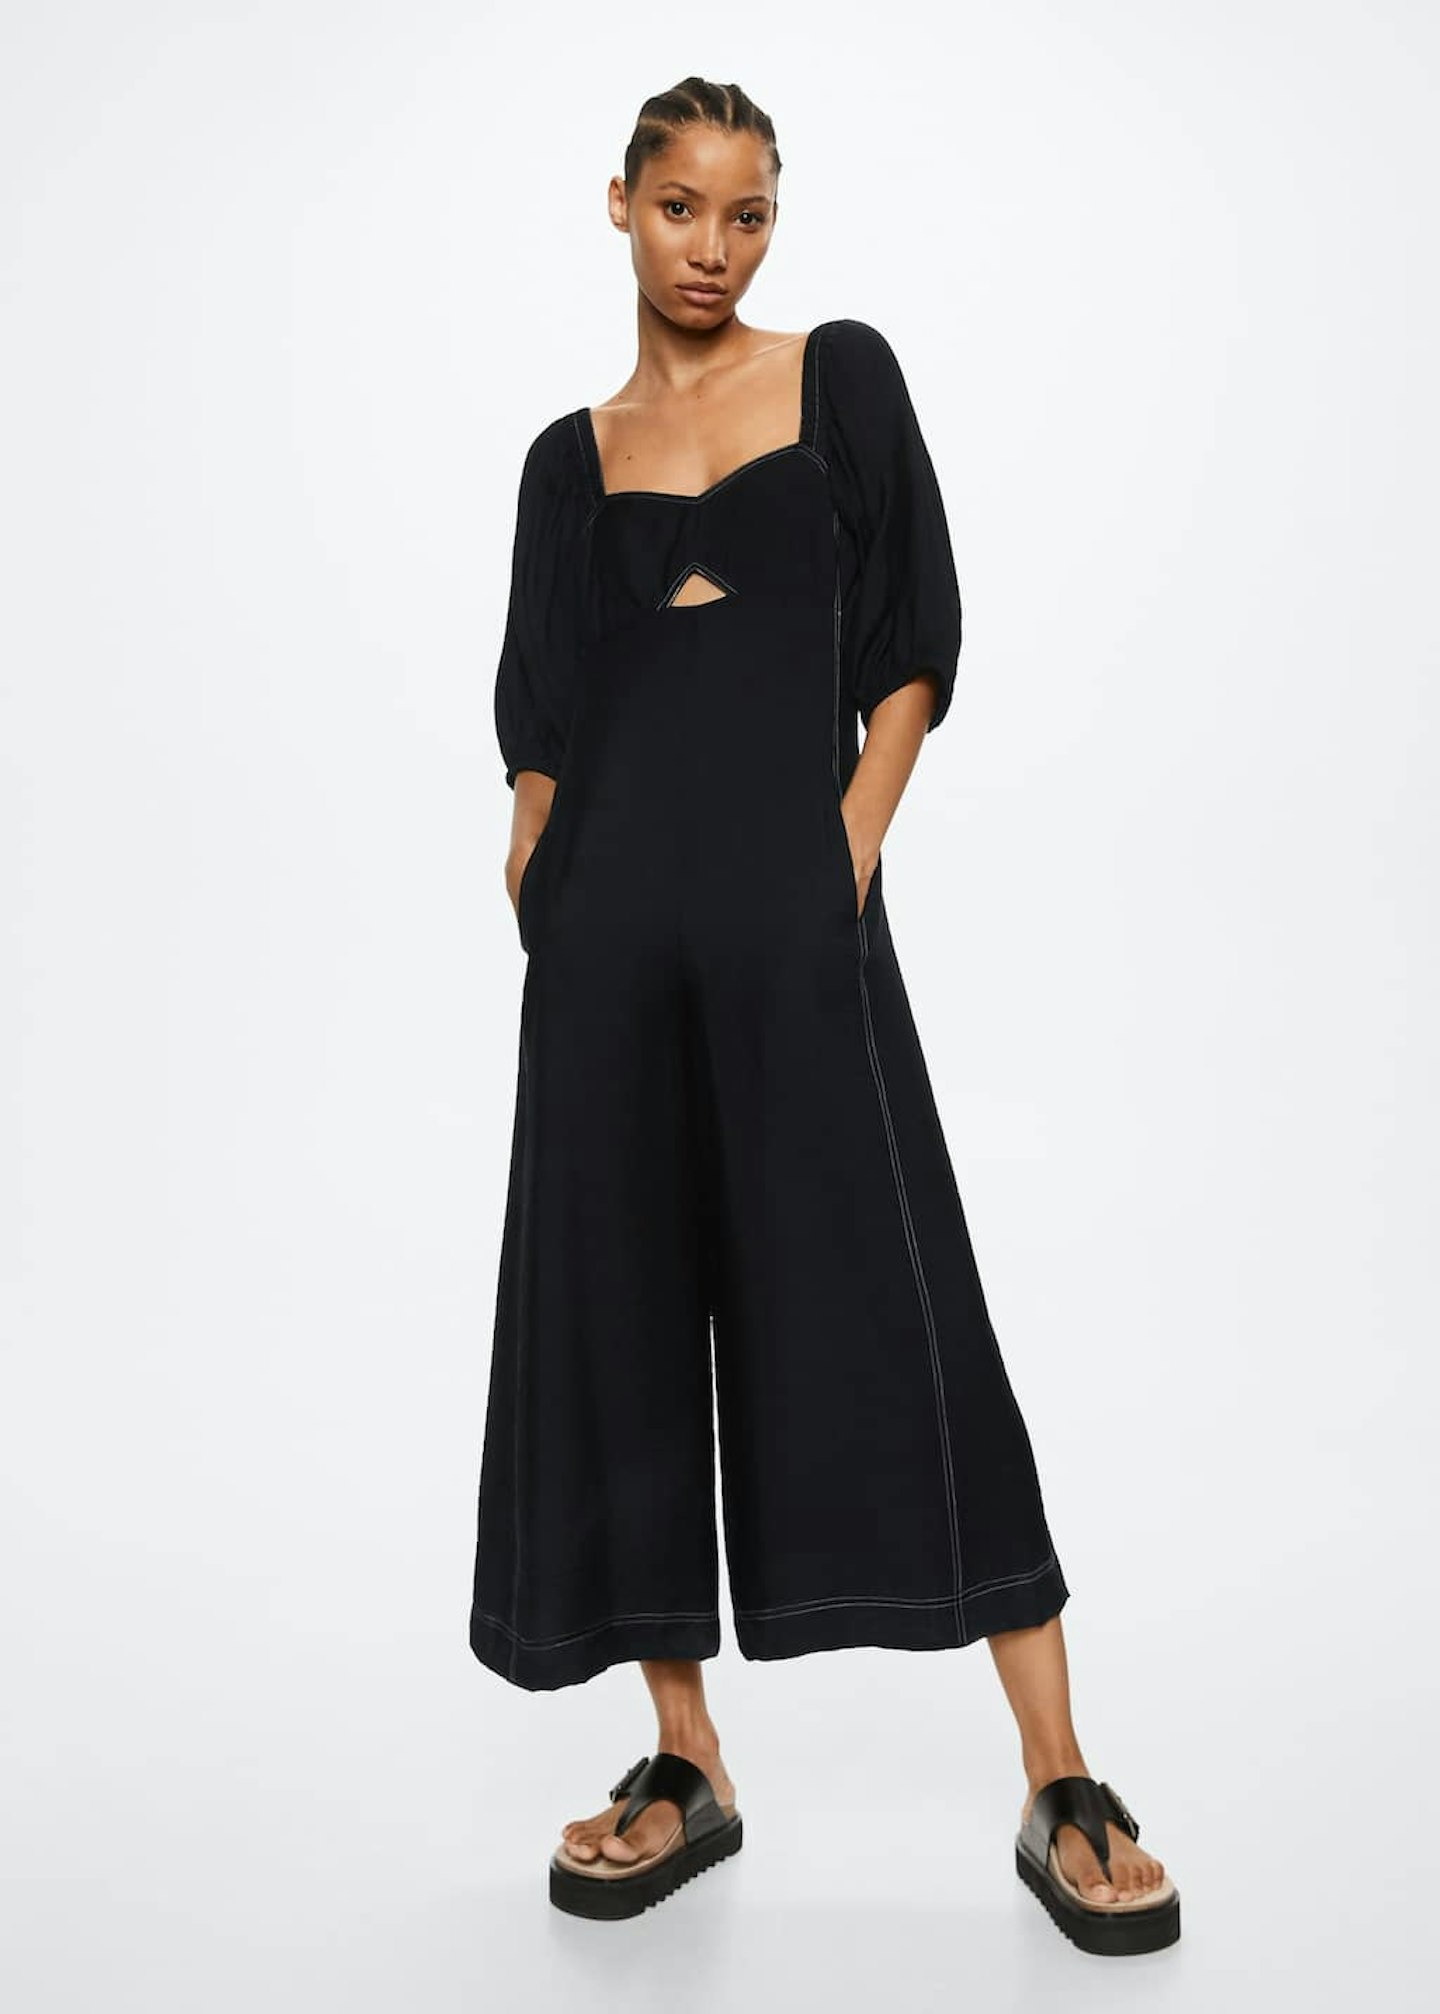 The Best Long-Sleeved Jumpsuits | Fashion | Grazia